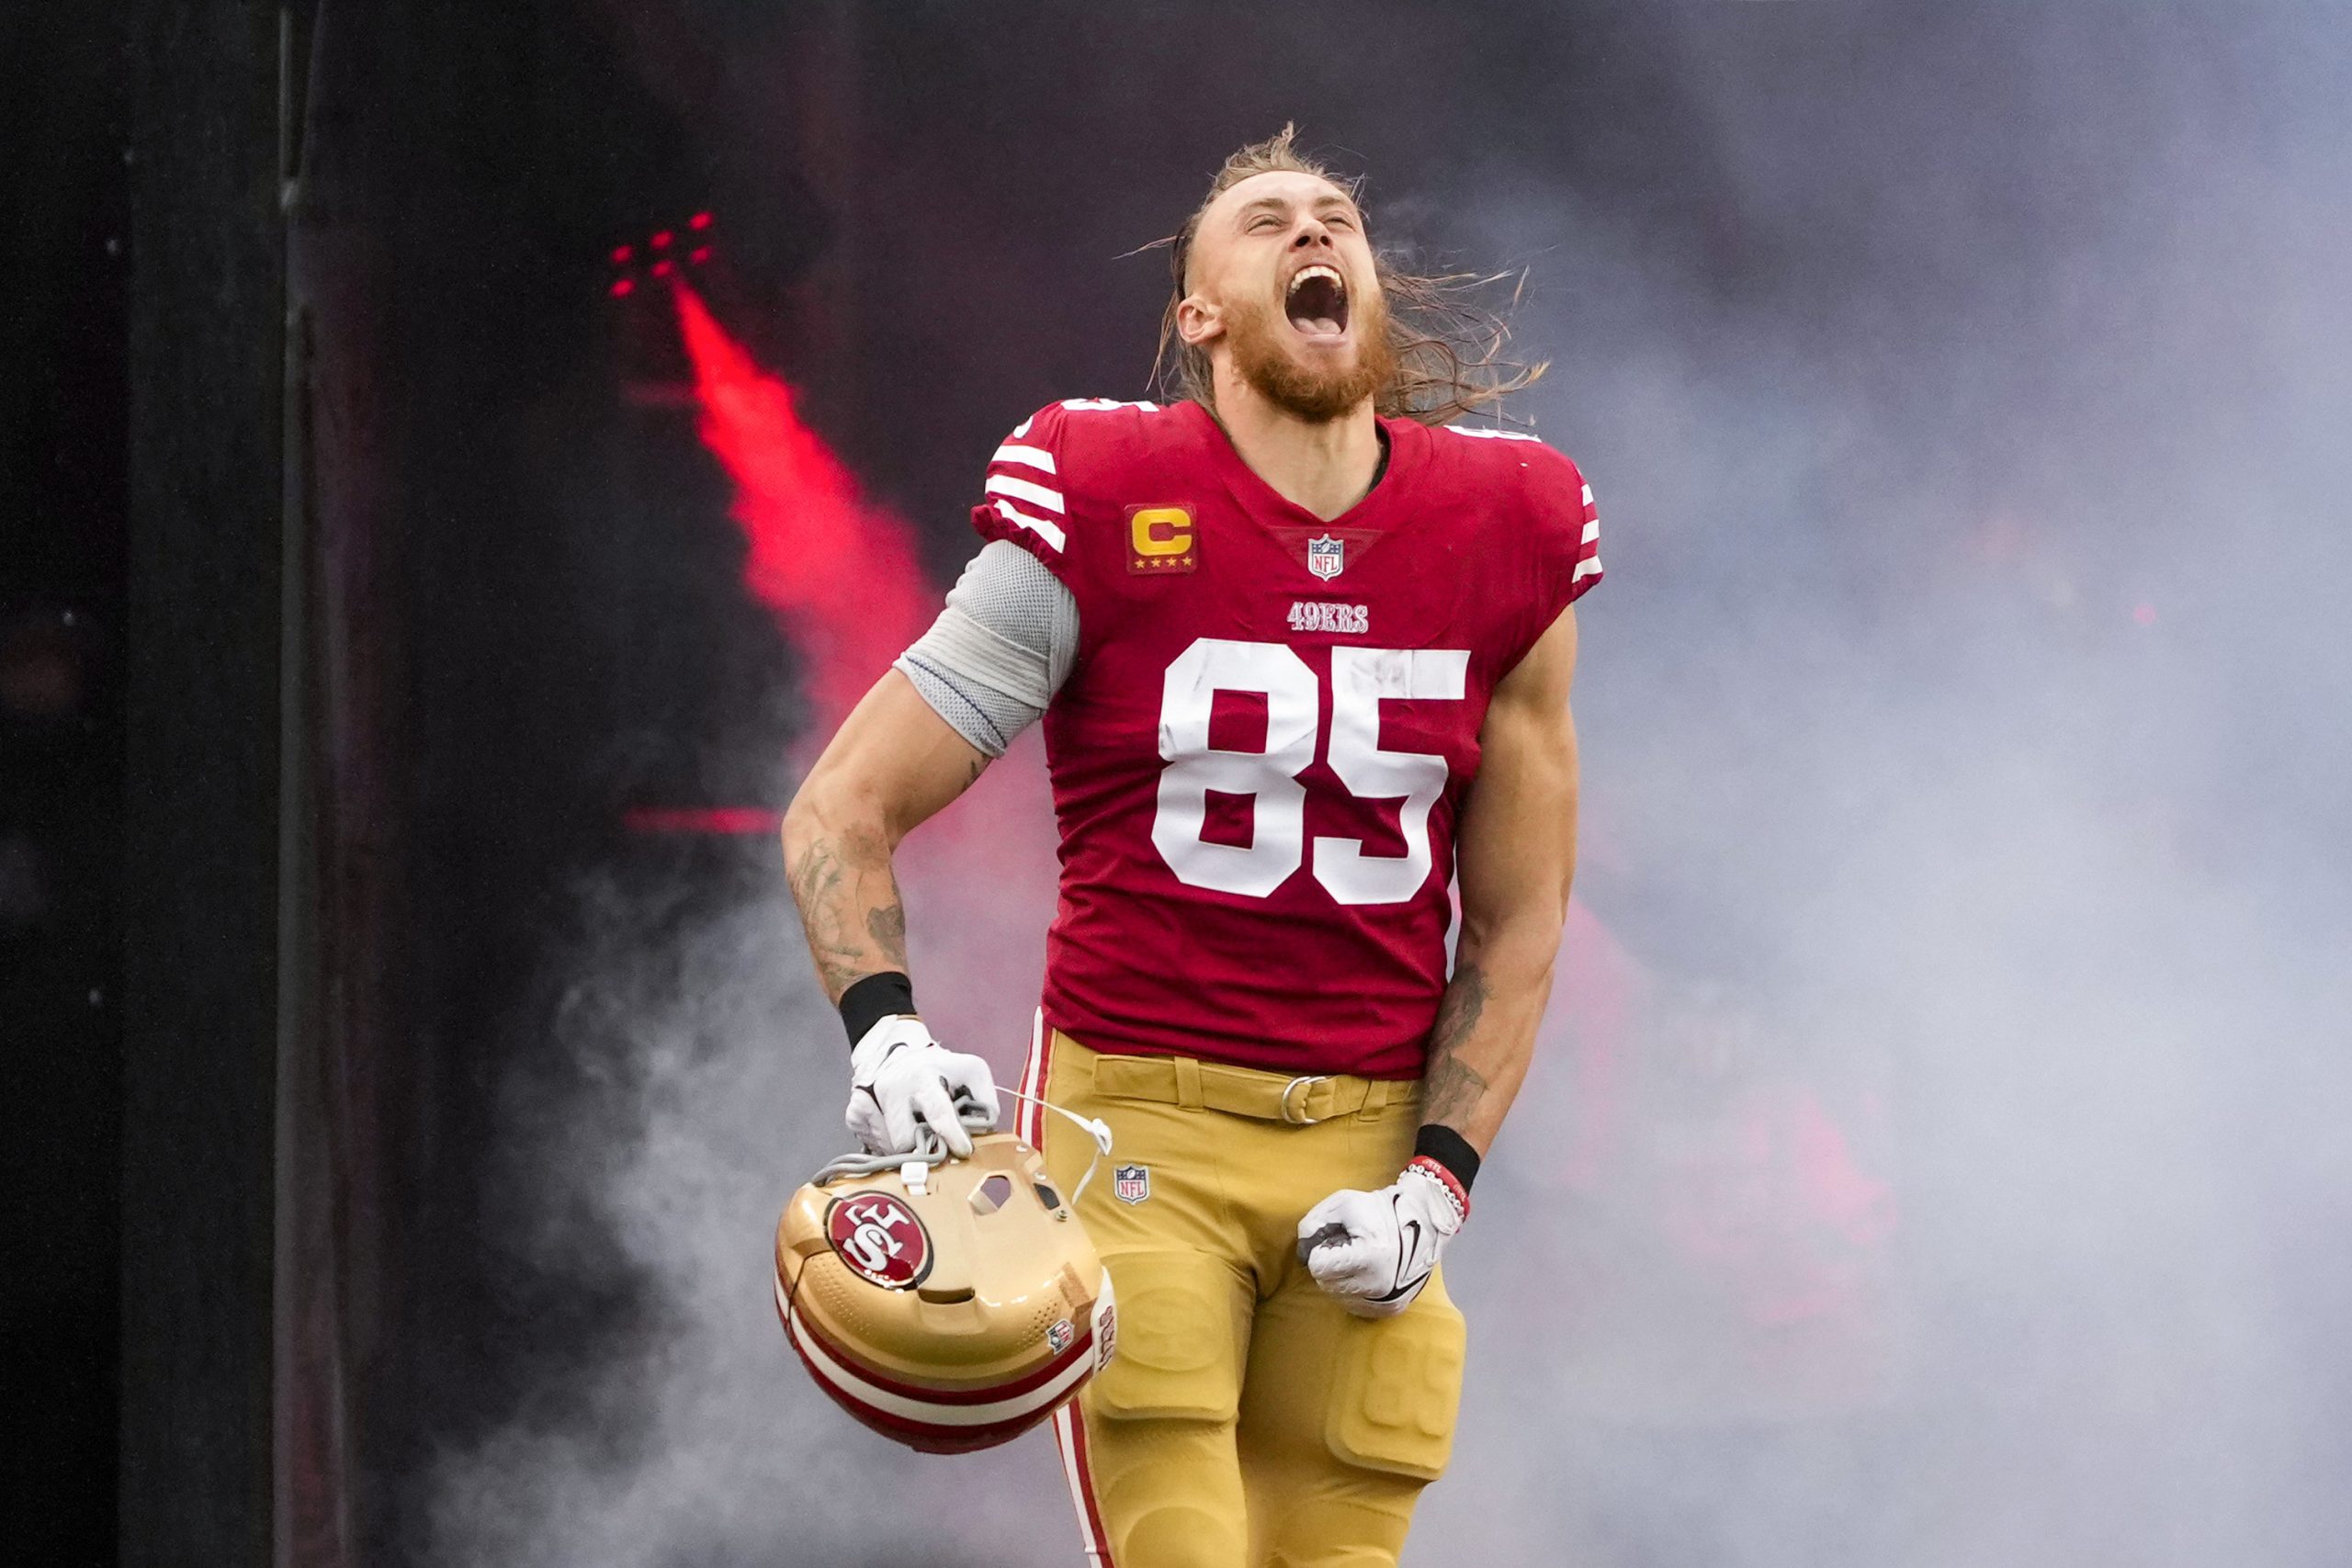 george kittle of the 49ers